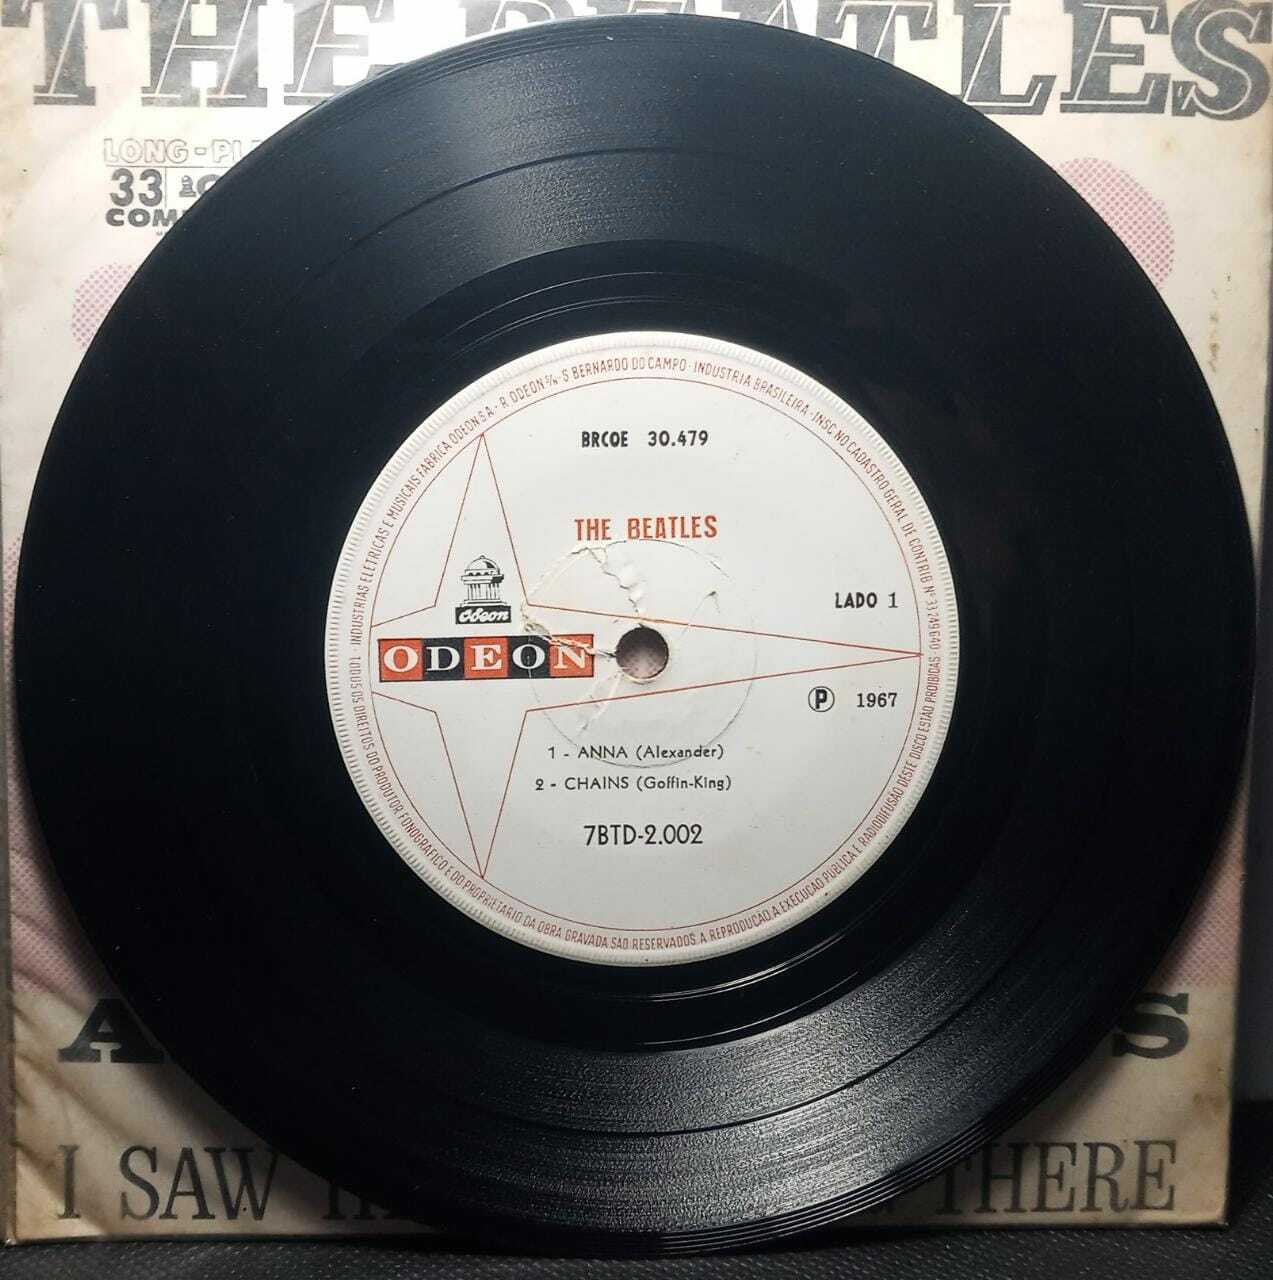 Vinil Compacto - Beatles The - I Saw her Standing There